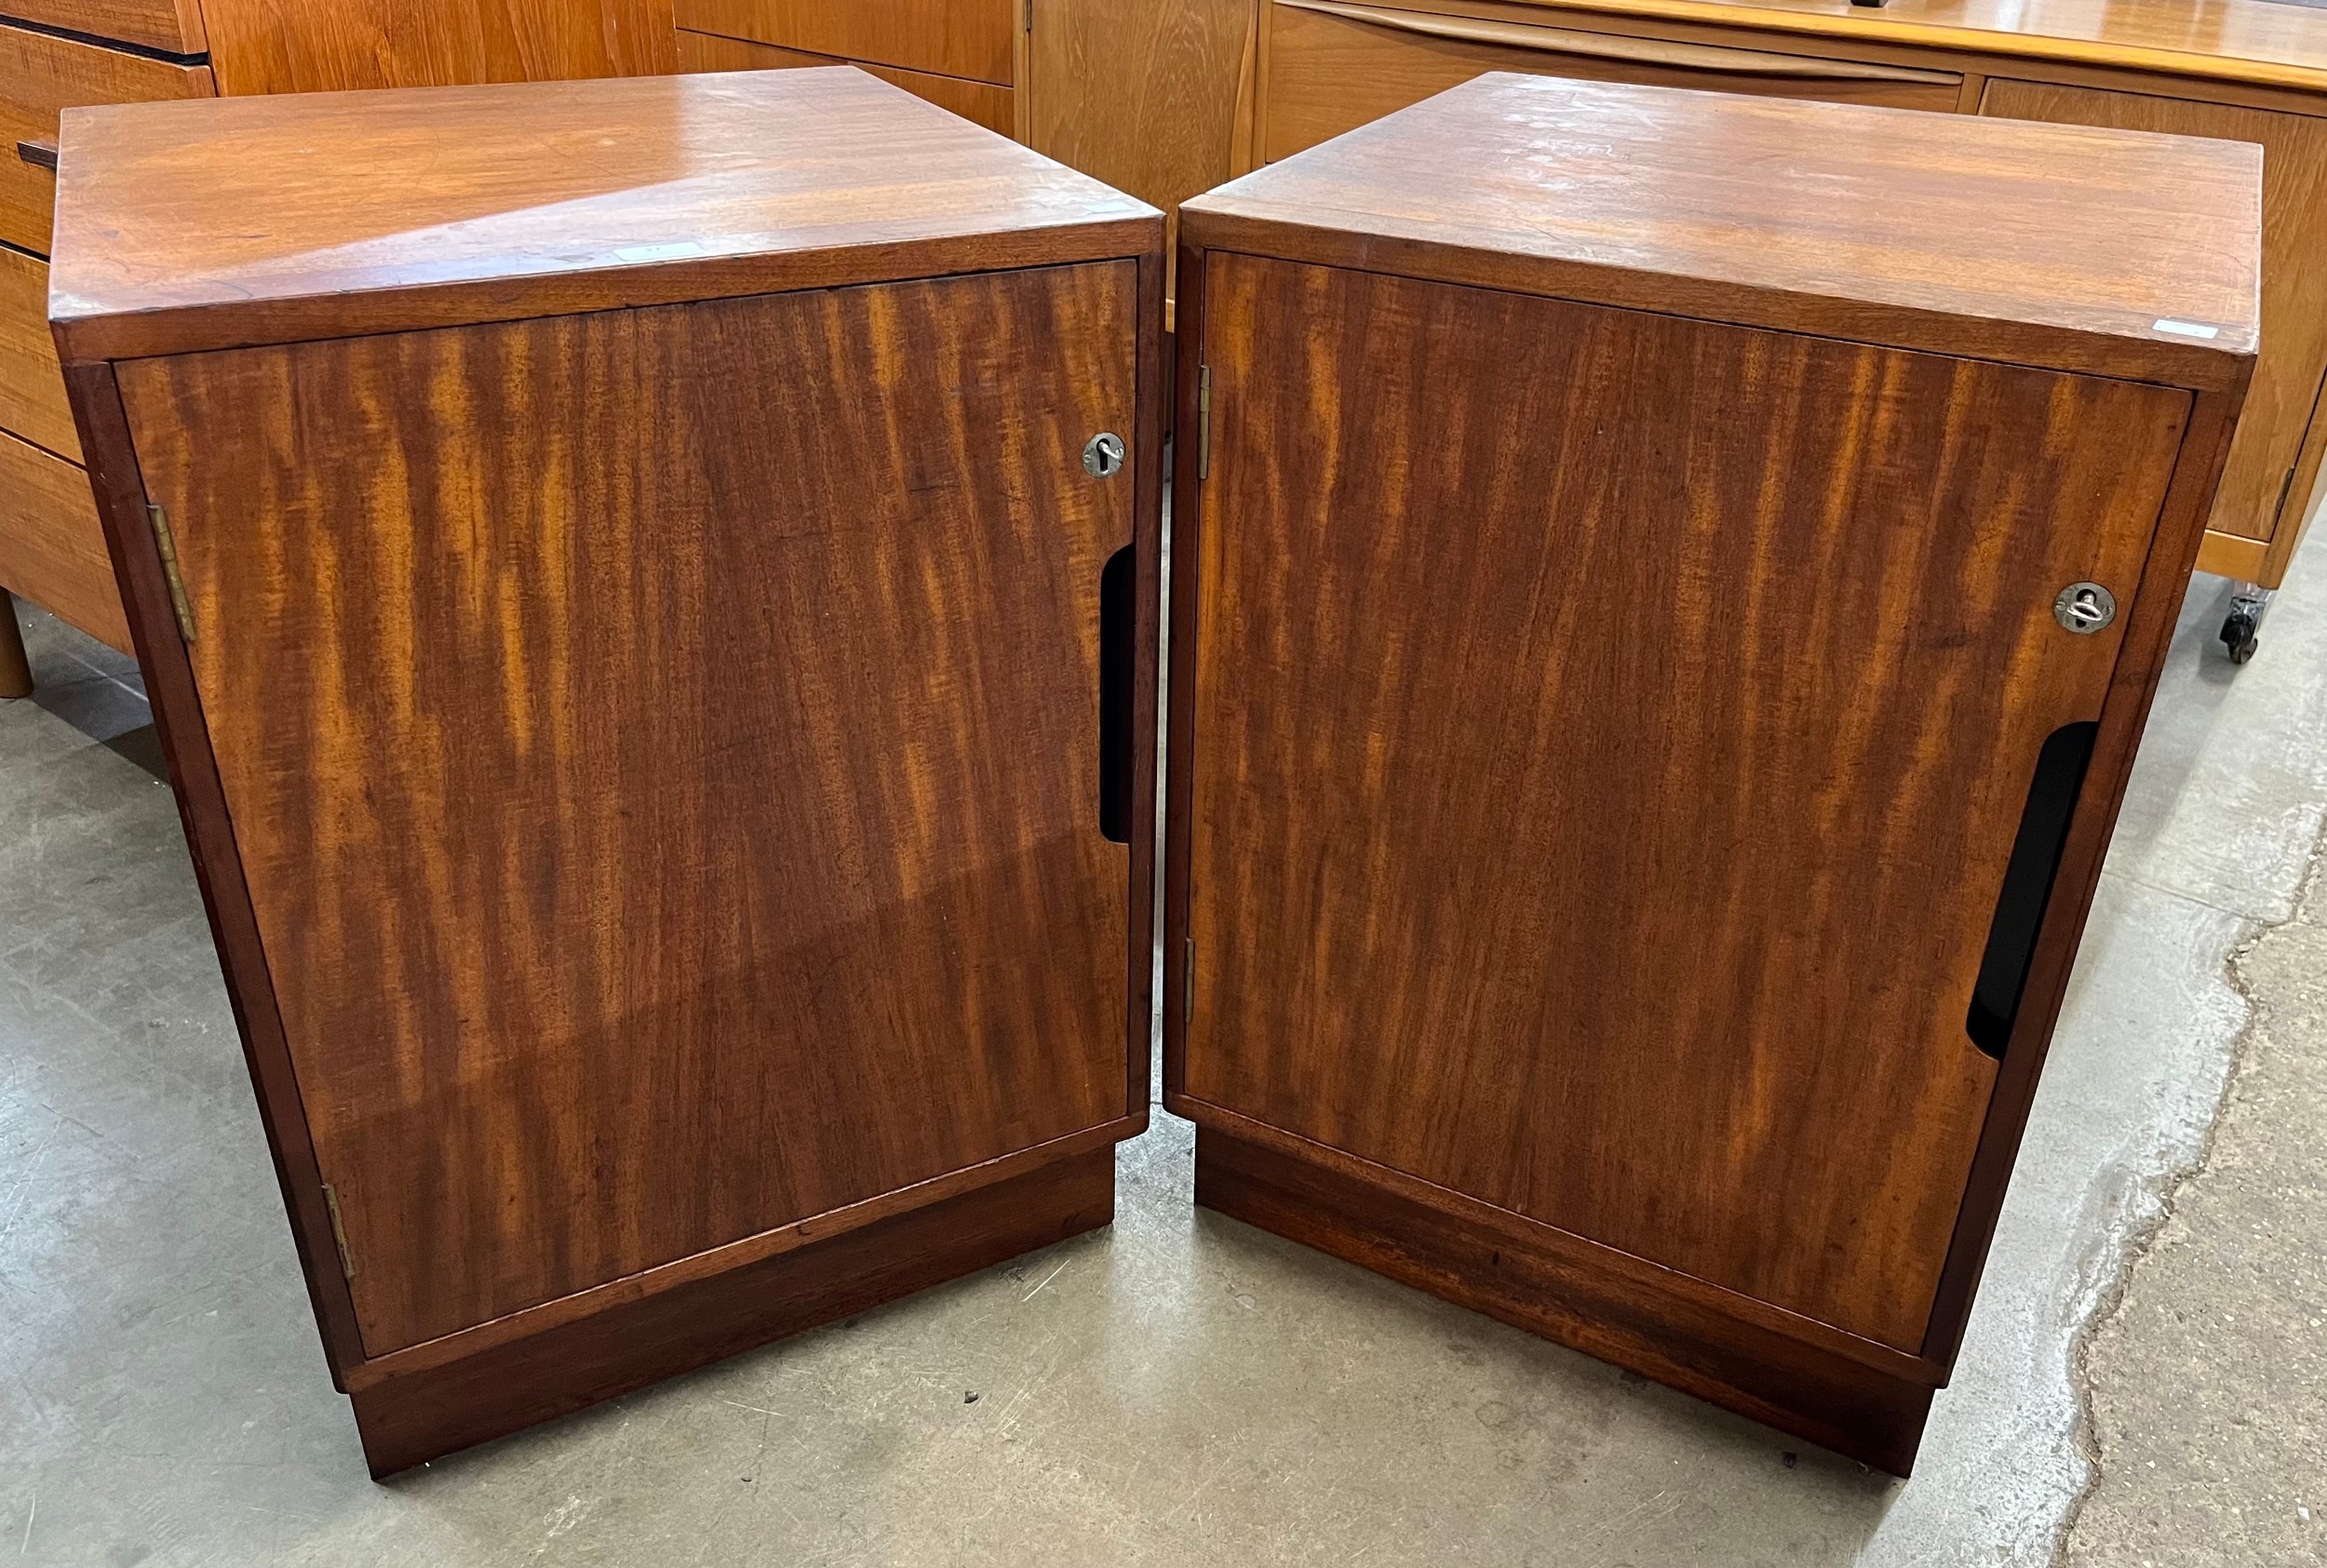 A pair of teak cabinets